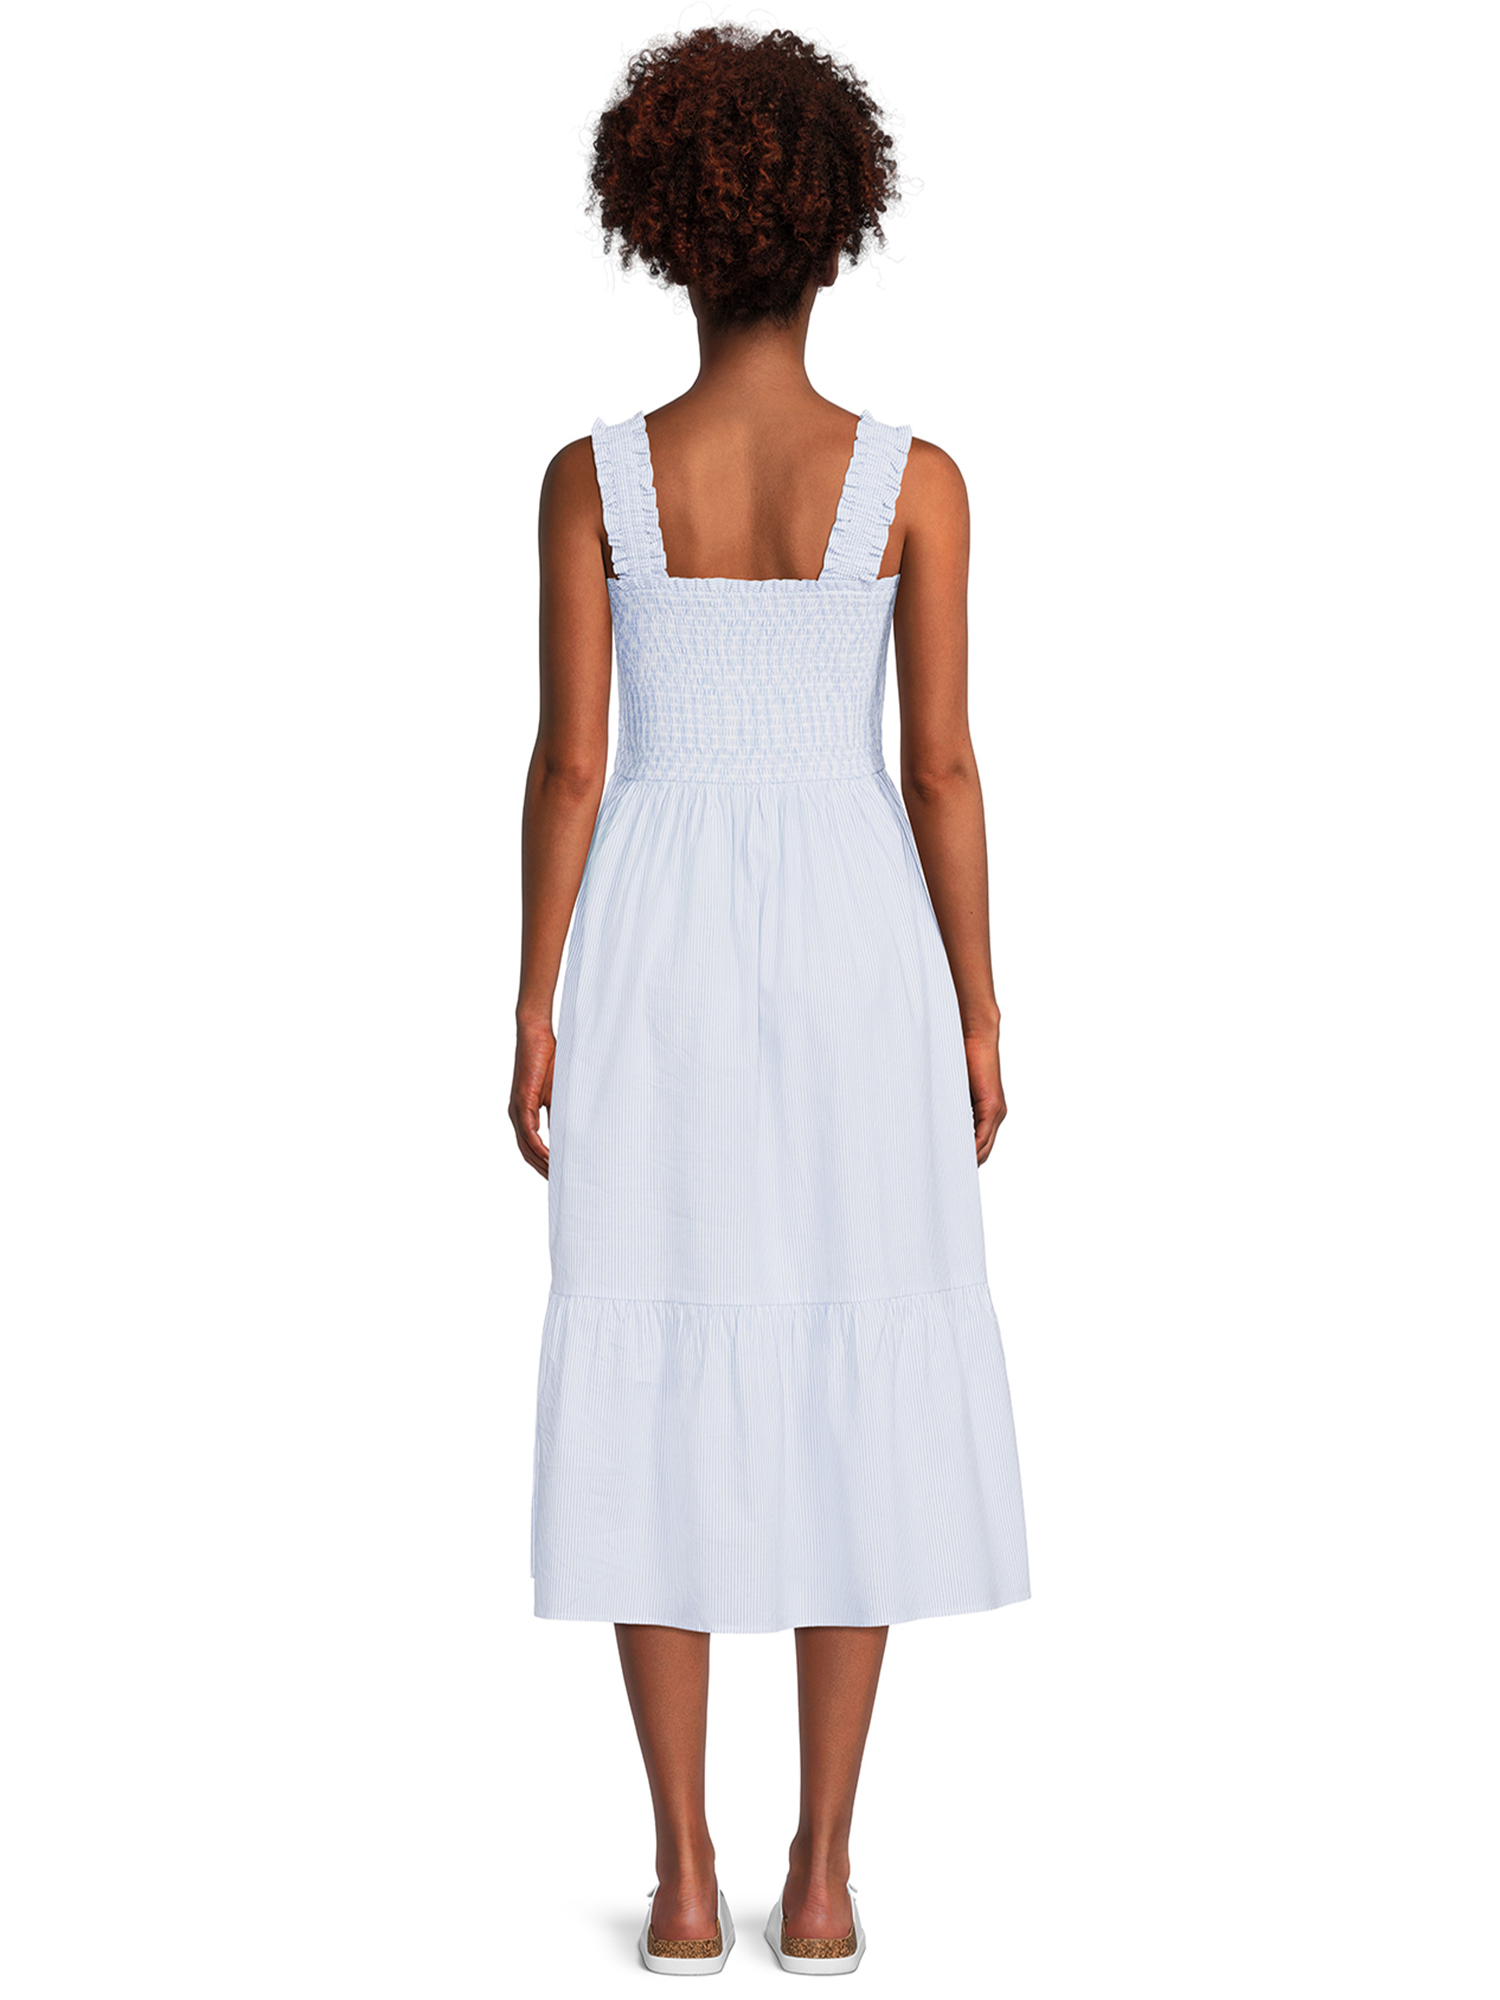 Time and Tru Women's Smocked Midi Dress with Ruffle Straps - image 3 of 5